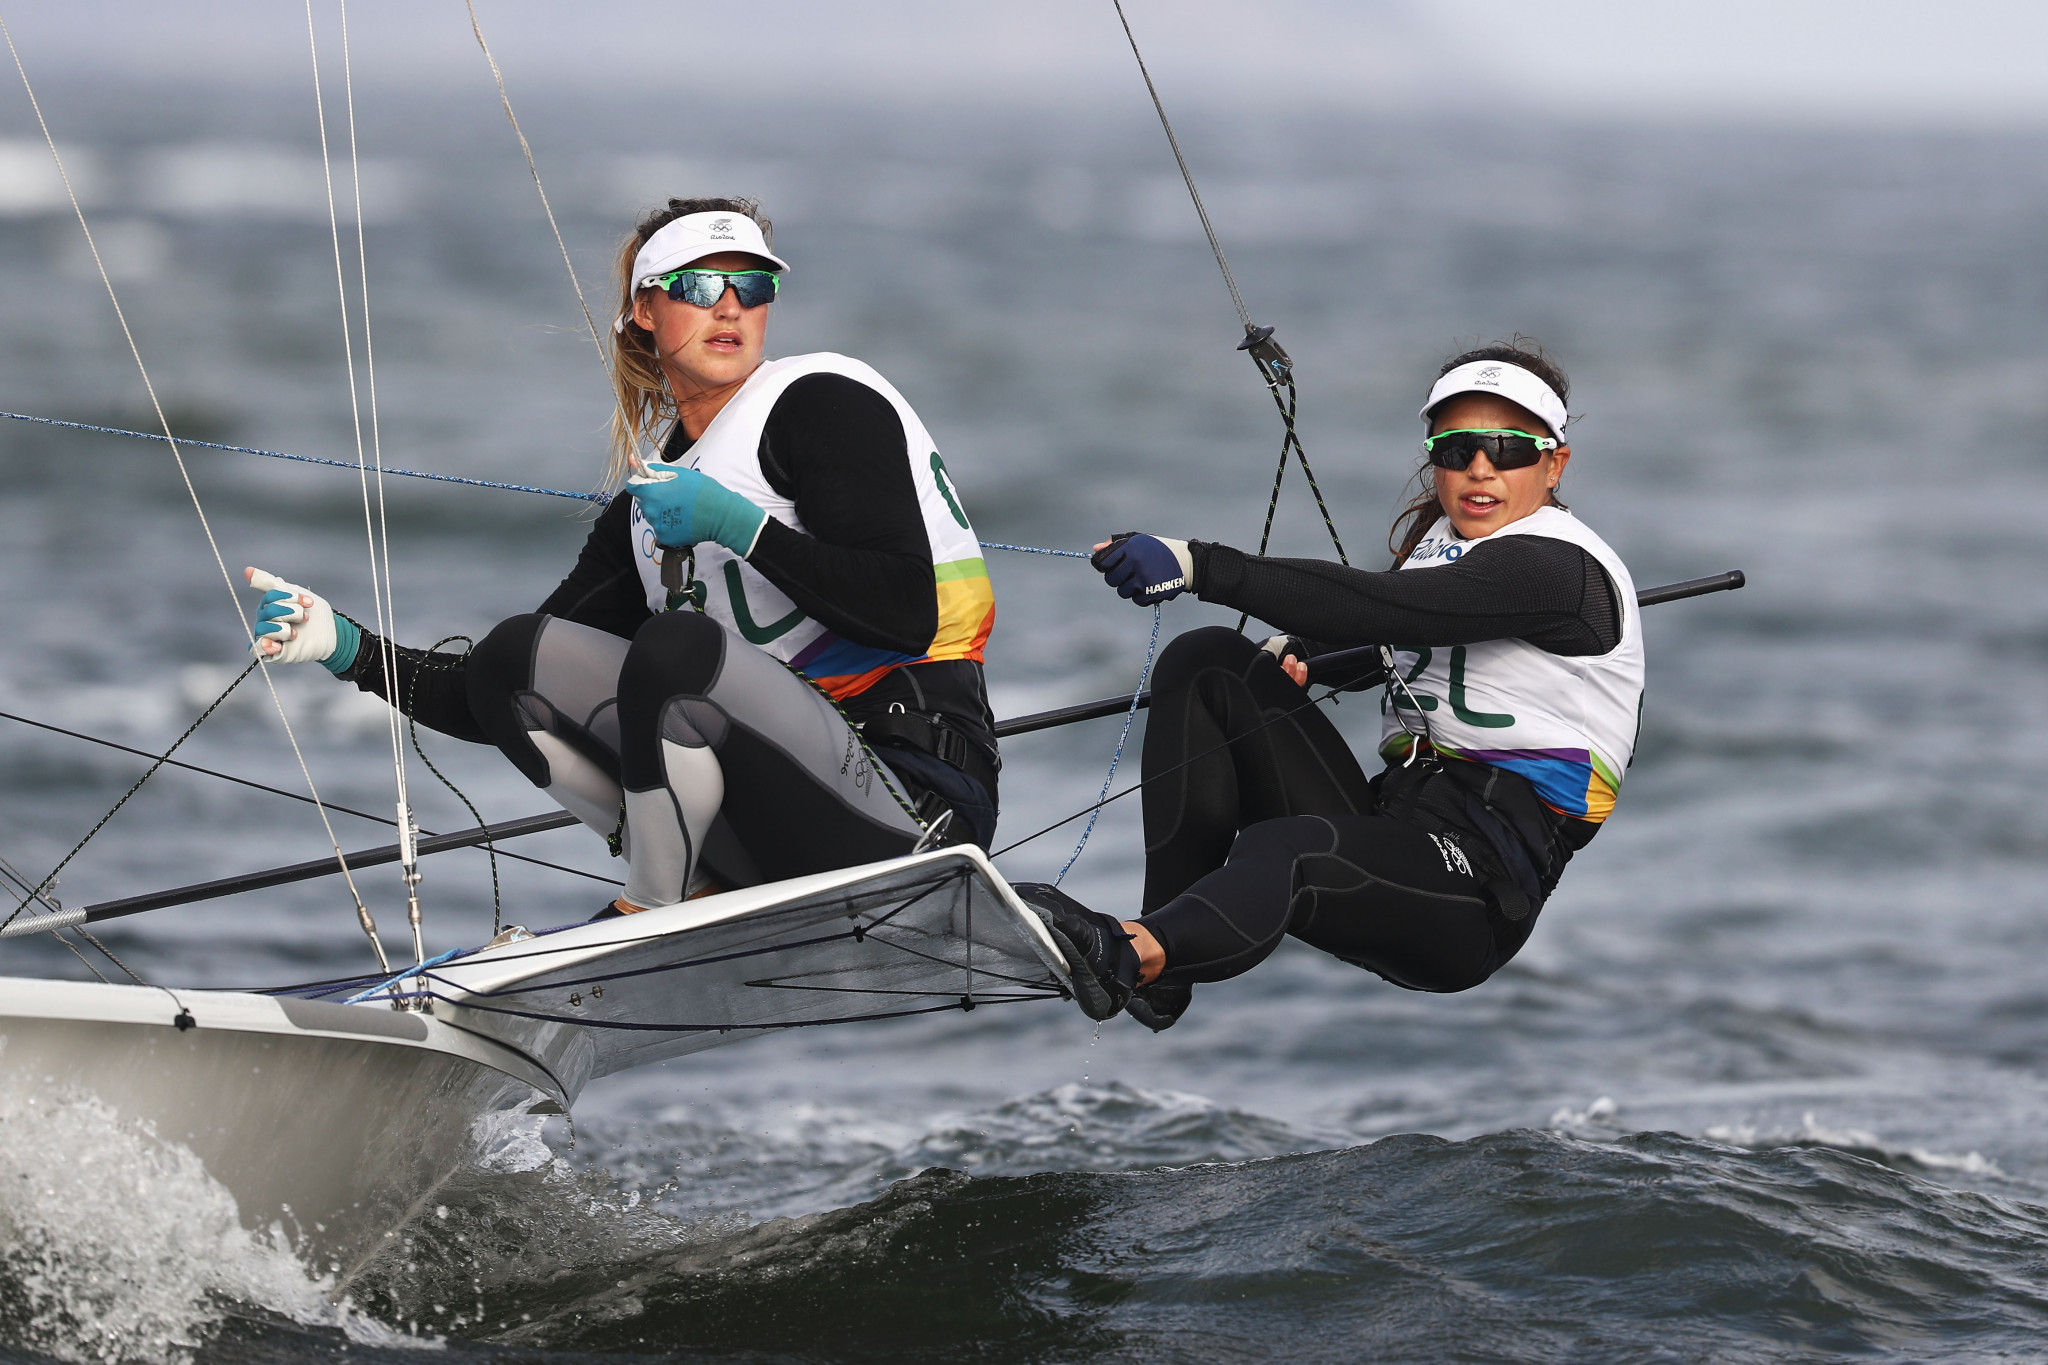 Brazil's Martine Grael and Kahena Kunze performed solidly once more to extend their lead at the 49erFX European Championships in England ©Getty Images